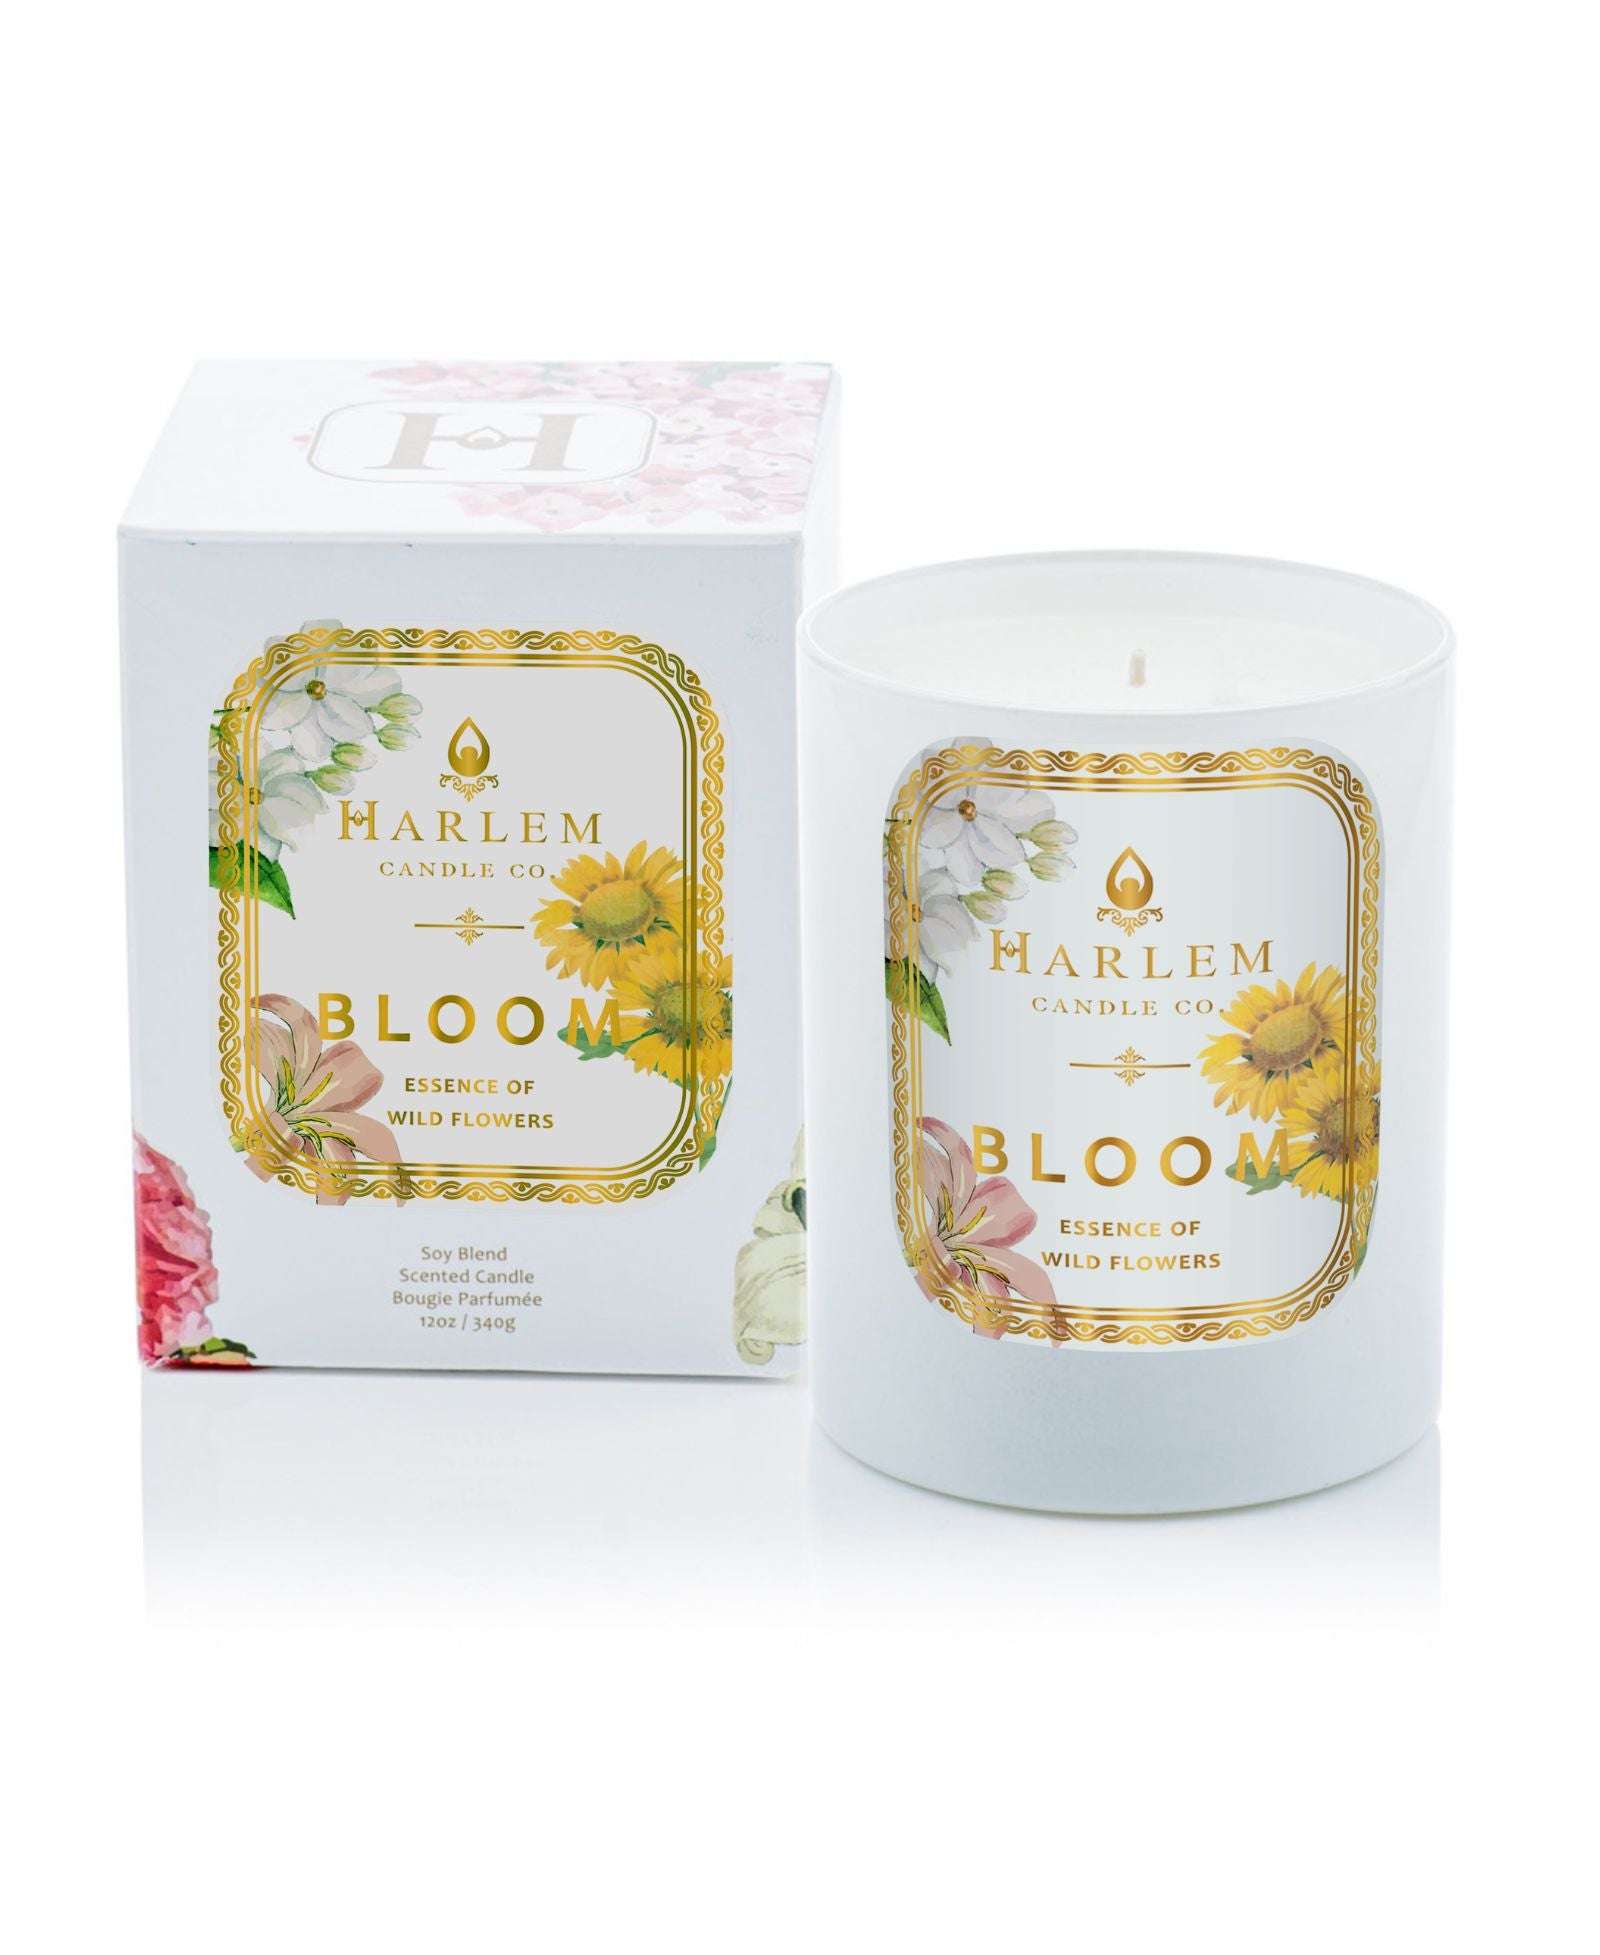 This is an image of our bloom candle in a white glass with a floral design on the label pictured next to its decorative box.